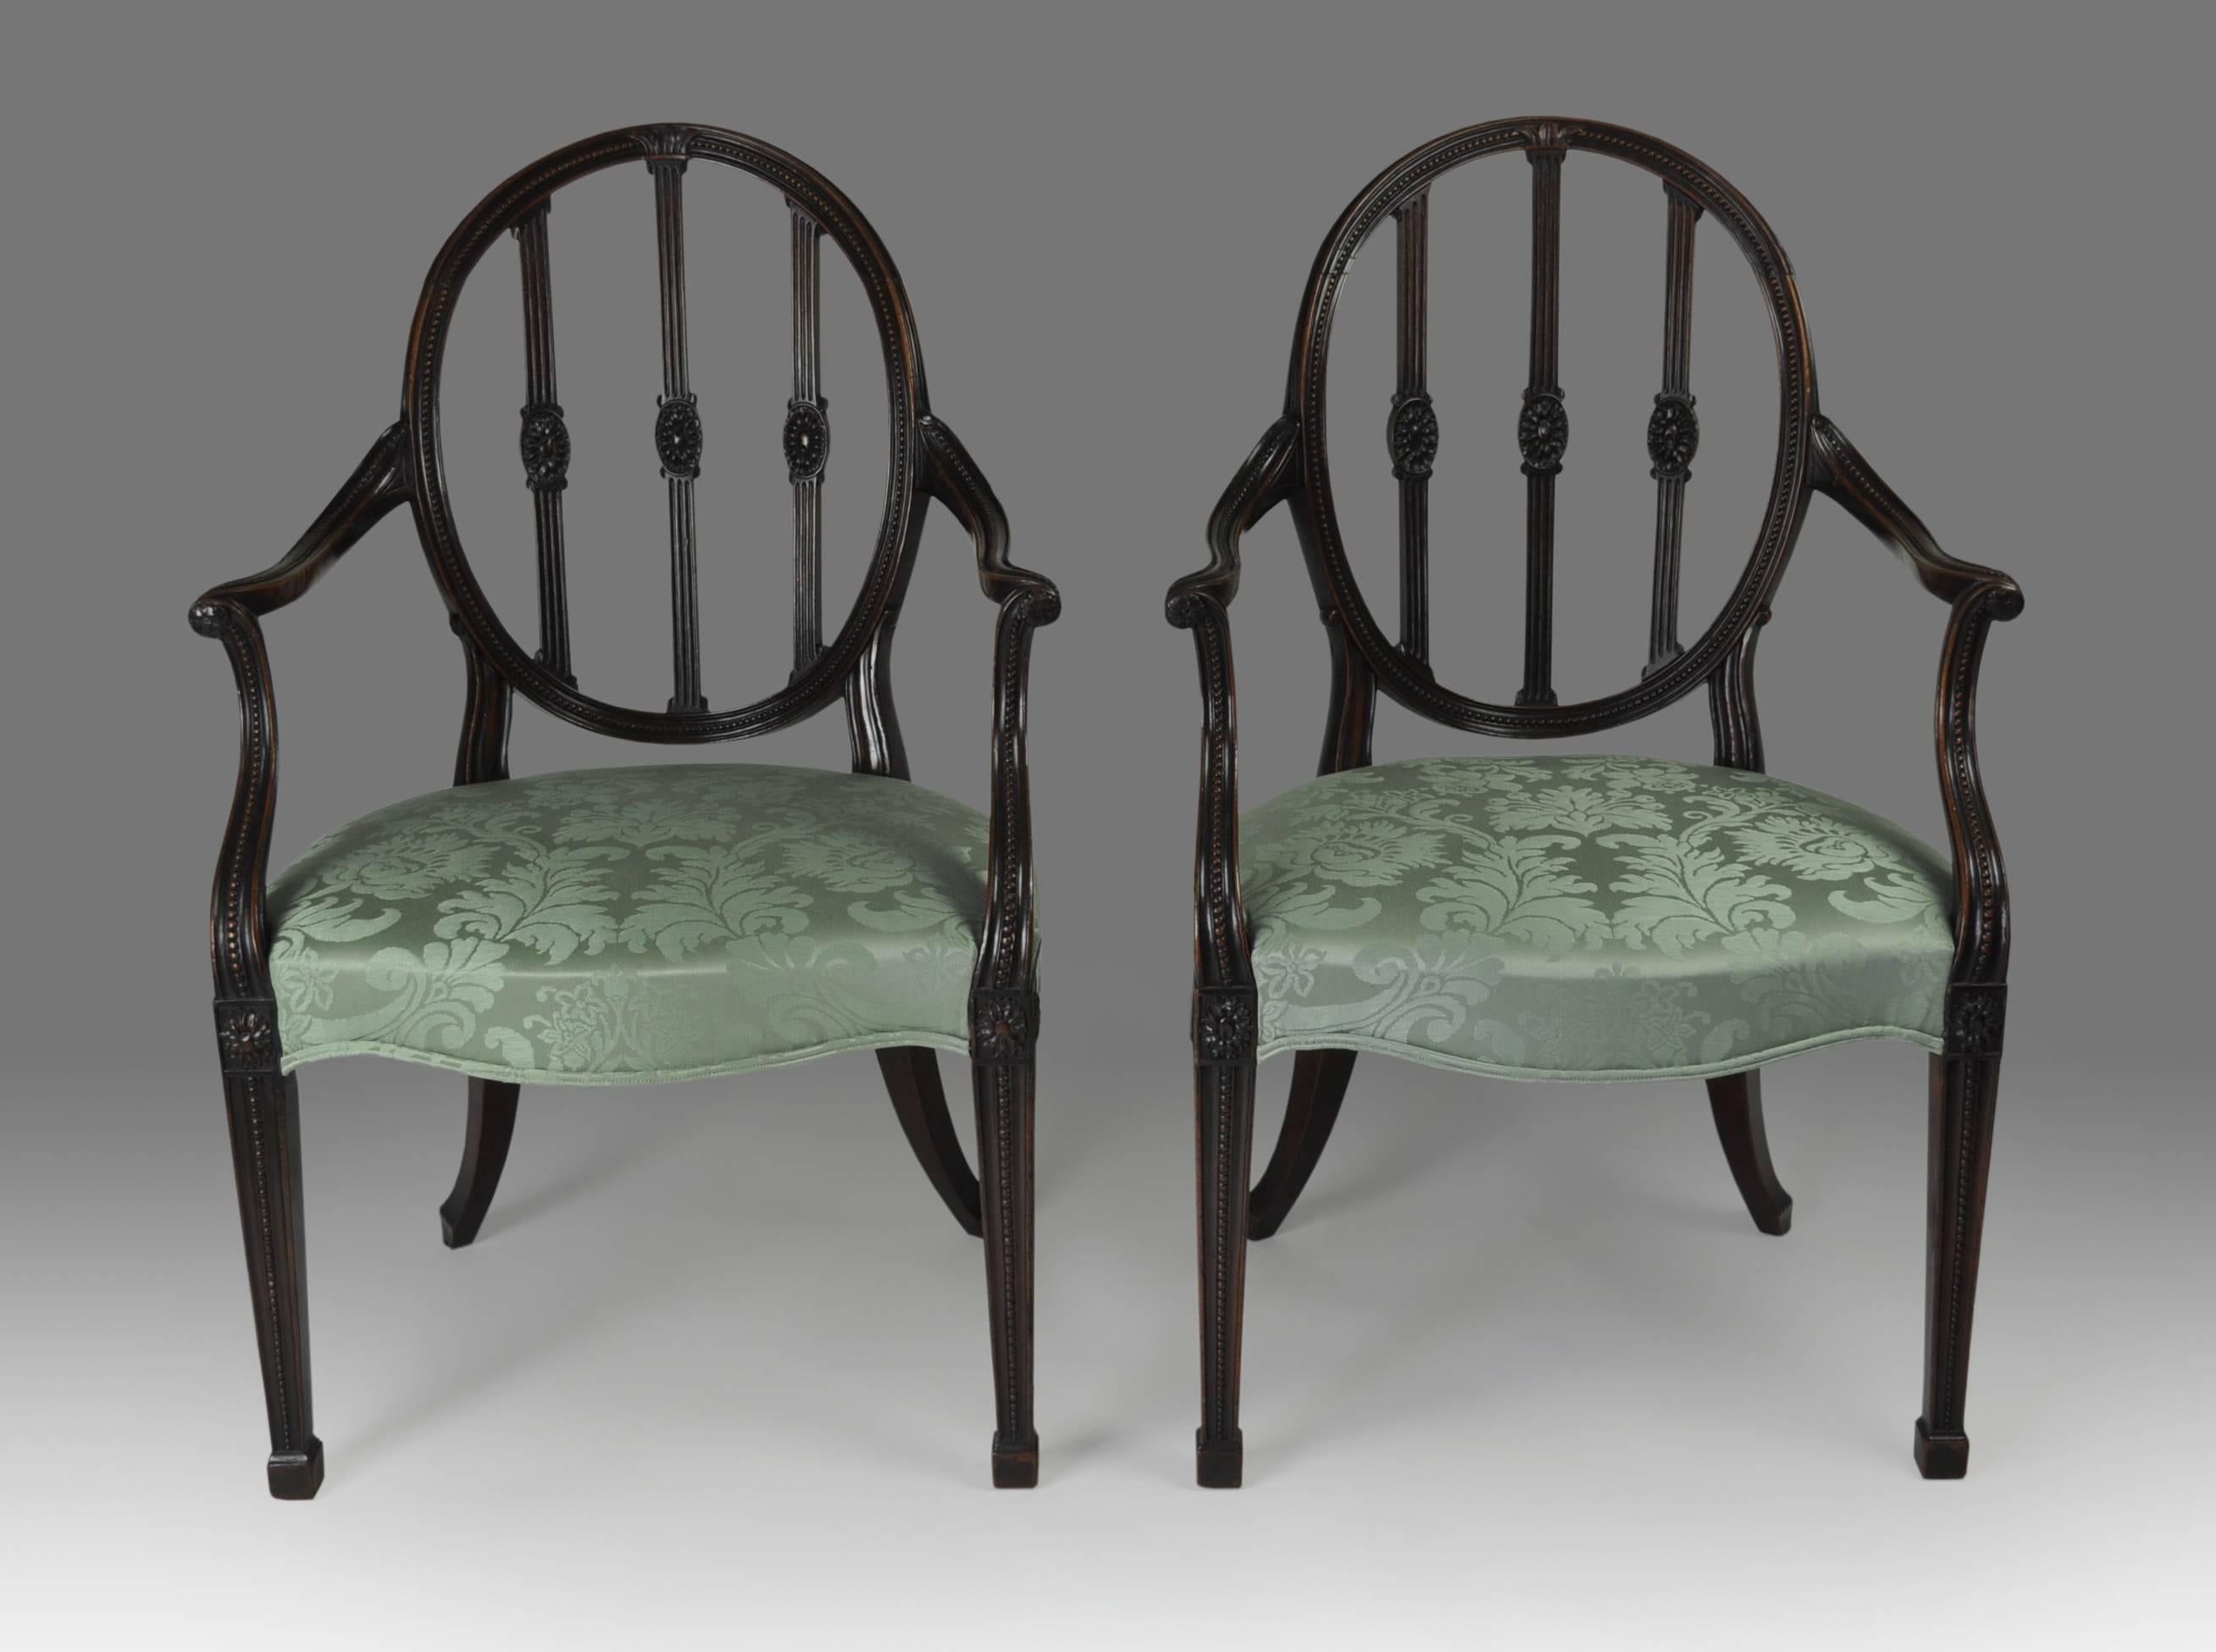 An outstanding pair of late 18th century Adam style mahogany open armchairs, the carved oval backs with beaded hoops enclosing three reeded splats with centred paterae, above out-scrolled beaded arms continuing to square tapered legs with block